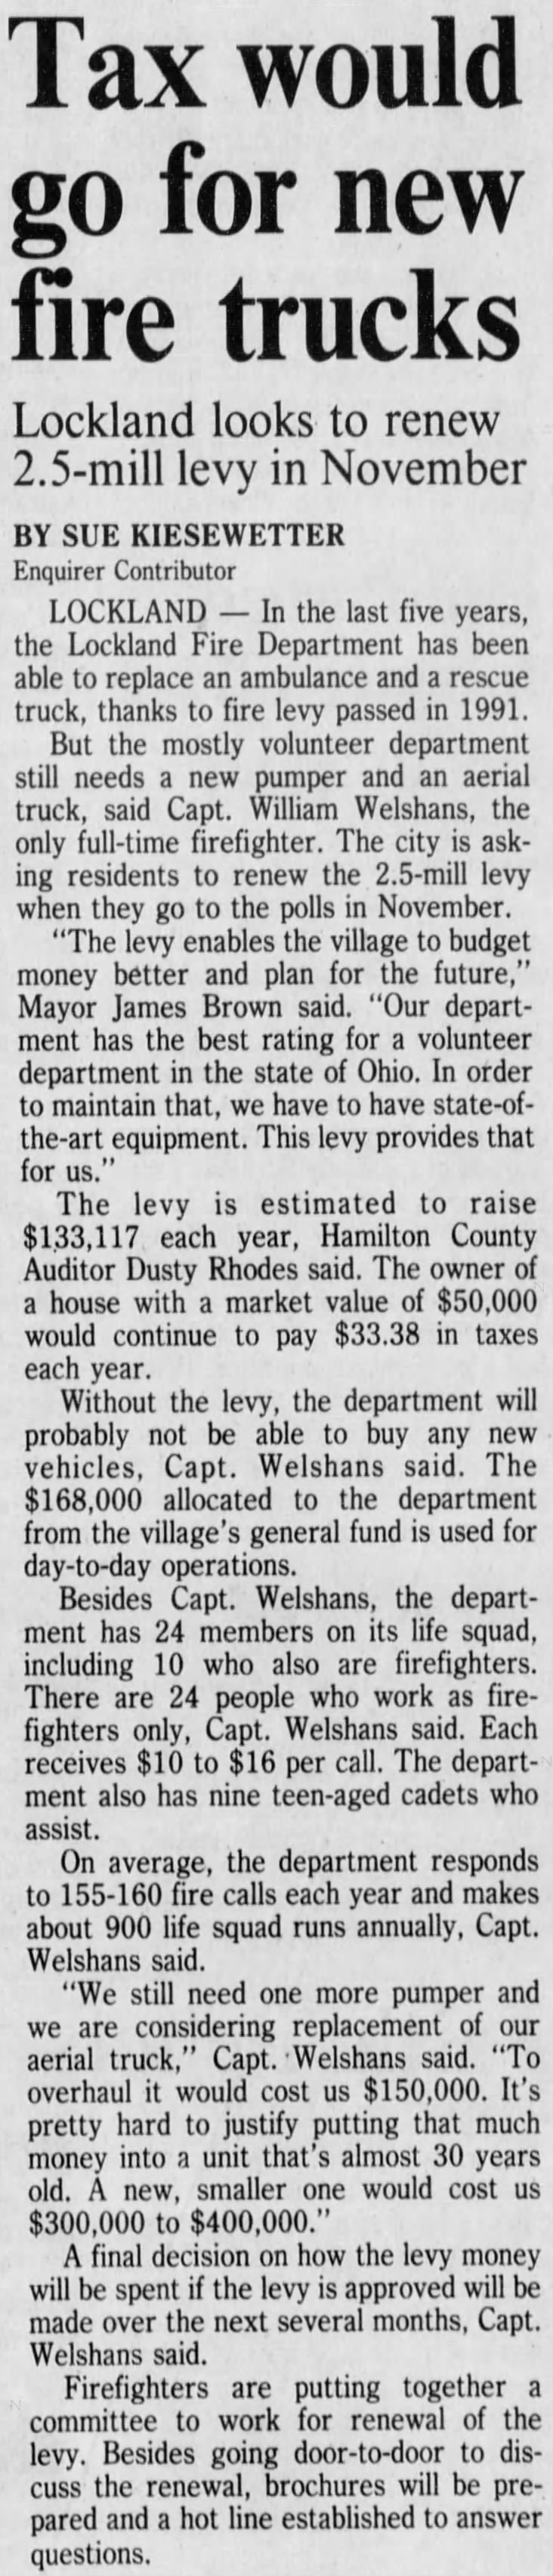 1996-01-26 - Lockland levy for new fire trucks